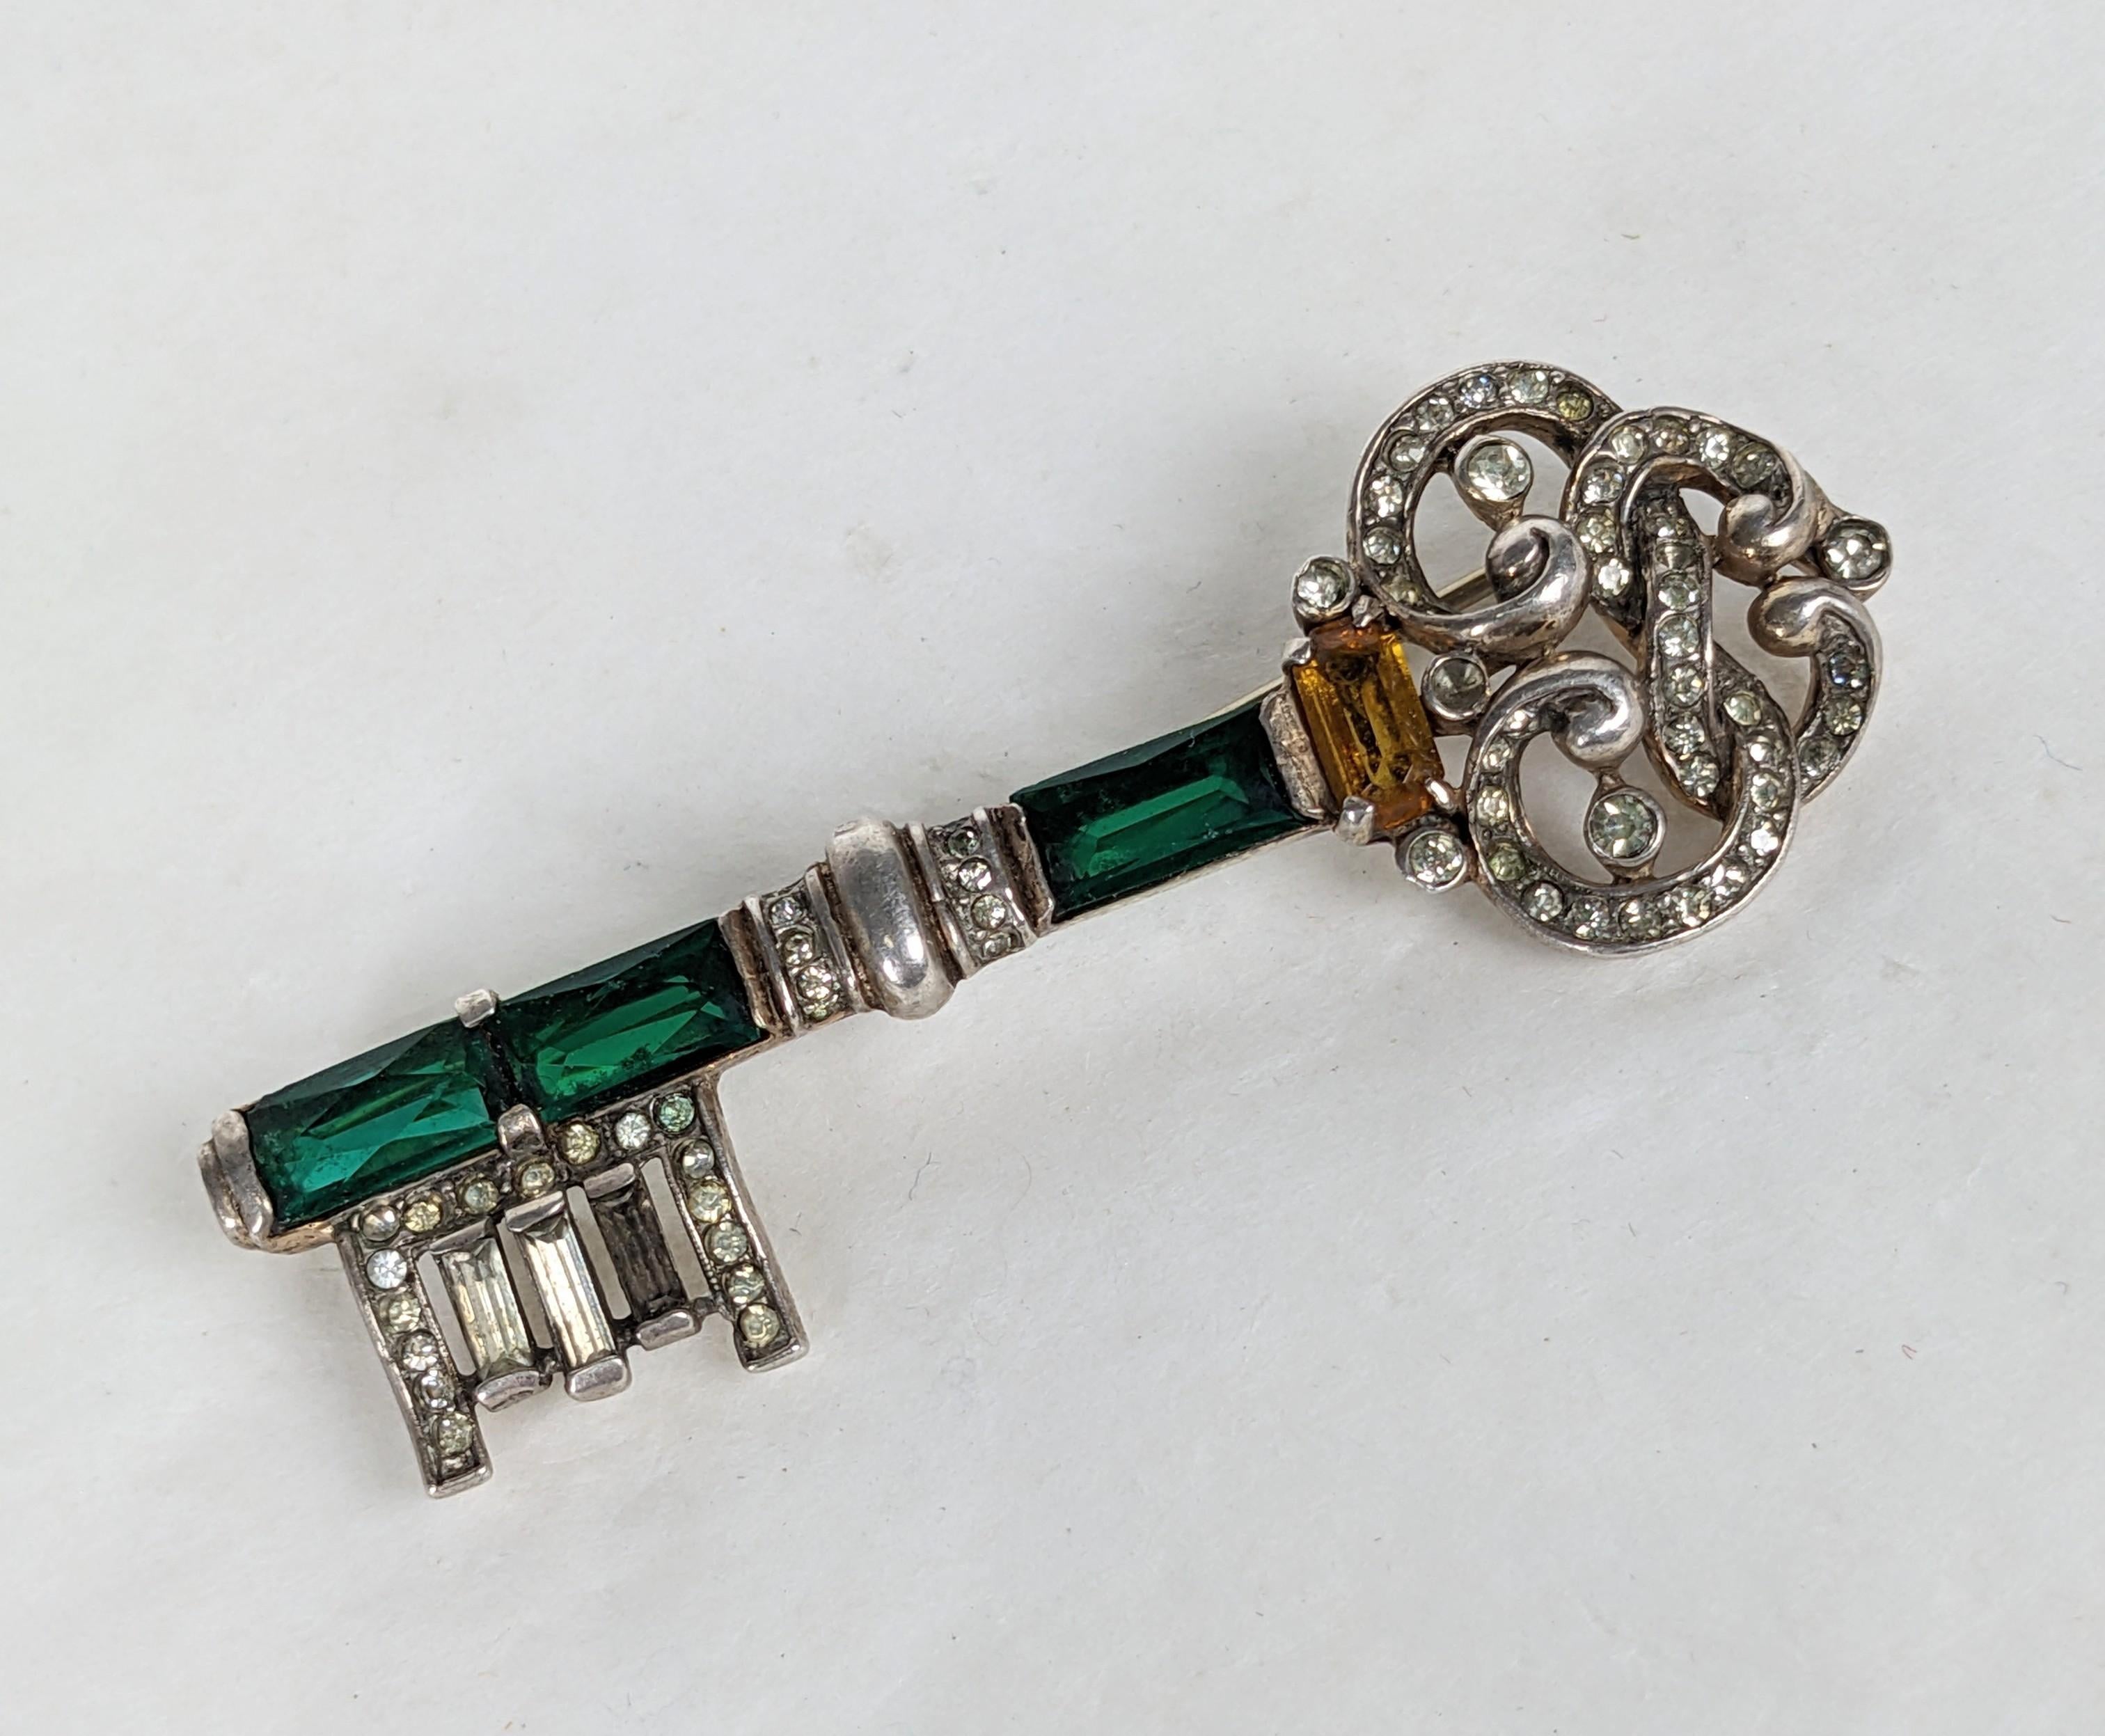 Trifari Sterling Vermeil Jeweled Key Brooch by Alfred Philippe from the 1940's with emerald and citrine crystals. 2.6